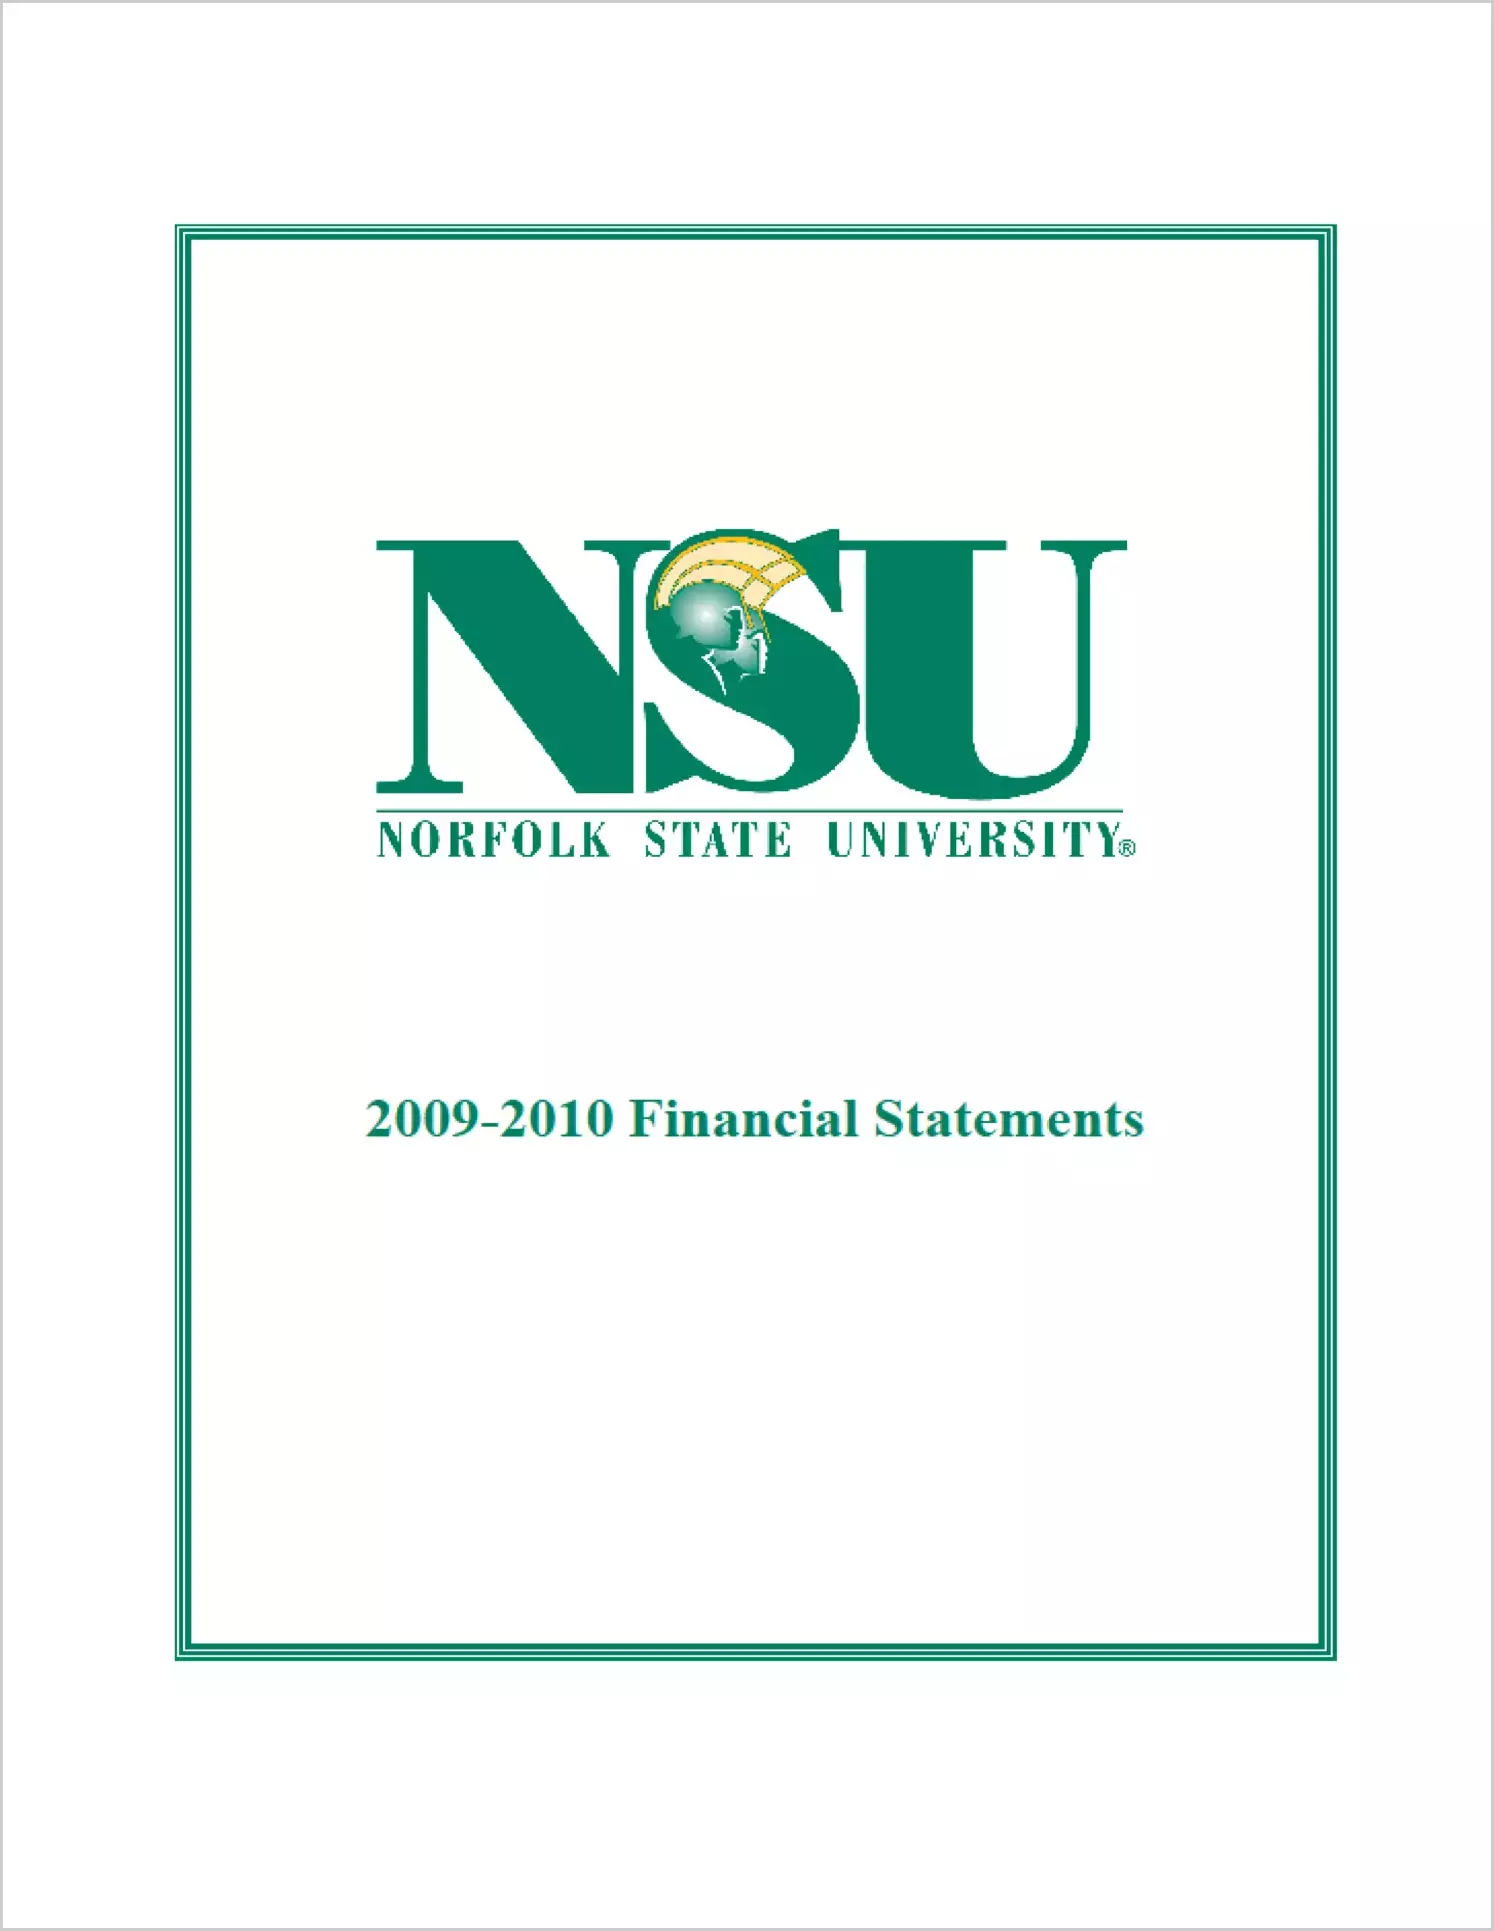 Norfolk State University Financial Statements for the year ended June 30, 2010